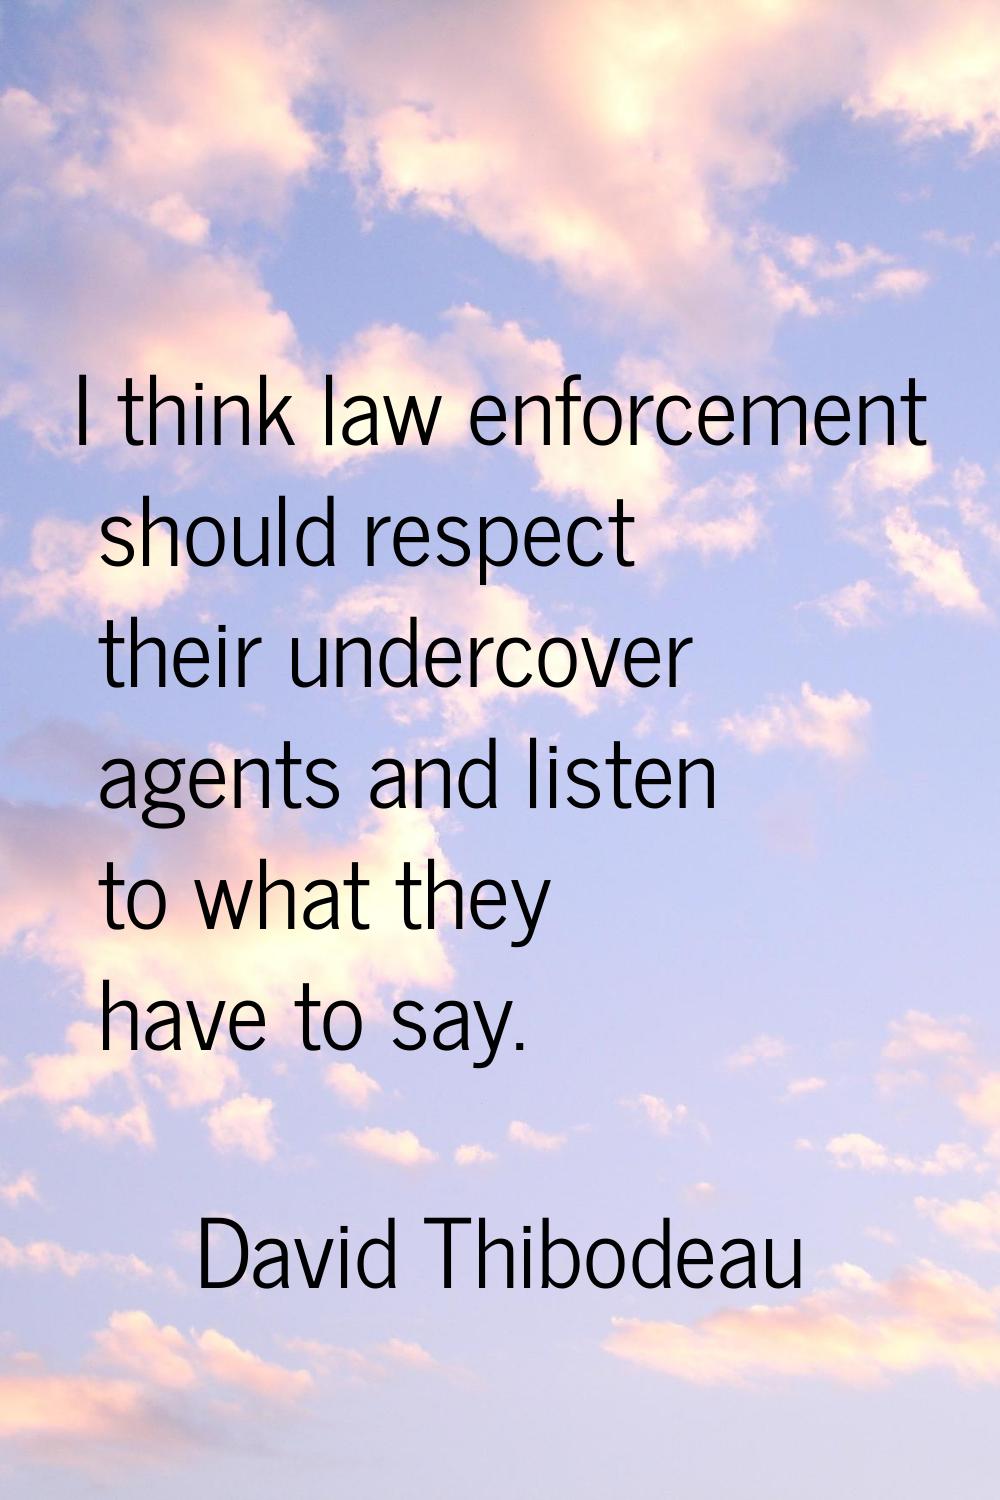 I think law enforcement should respect their undercover agents and listen to what they have to say.